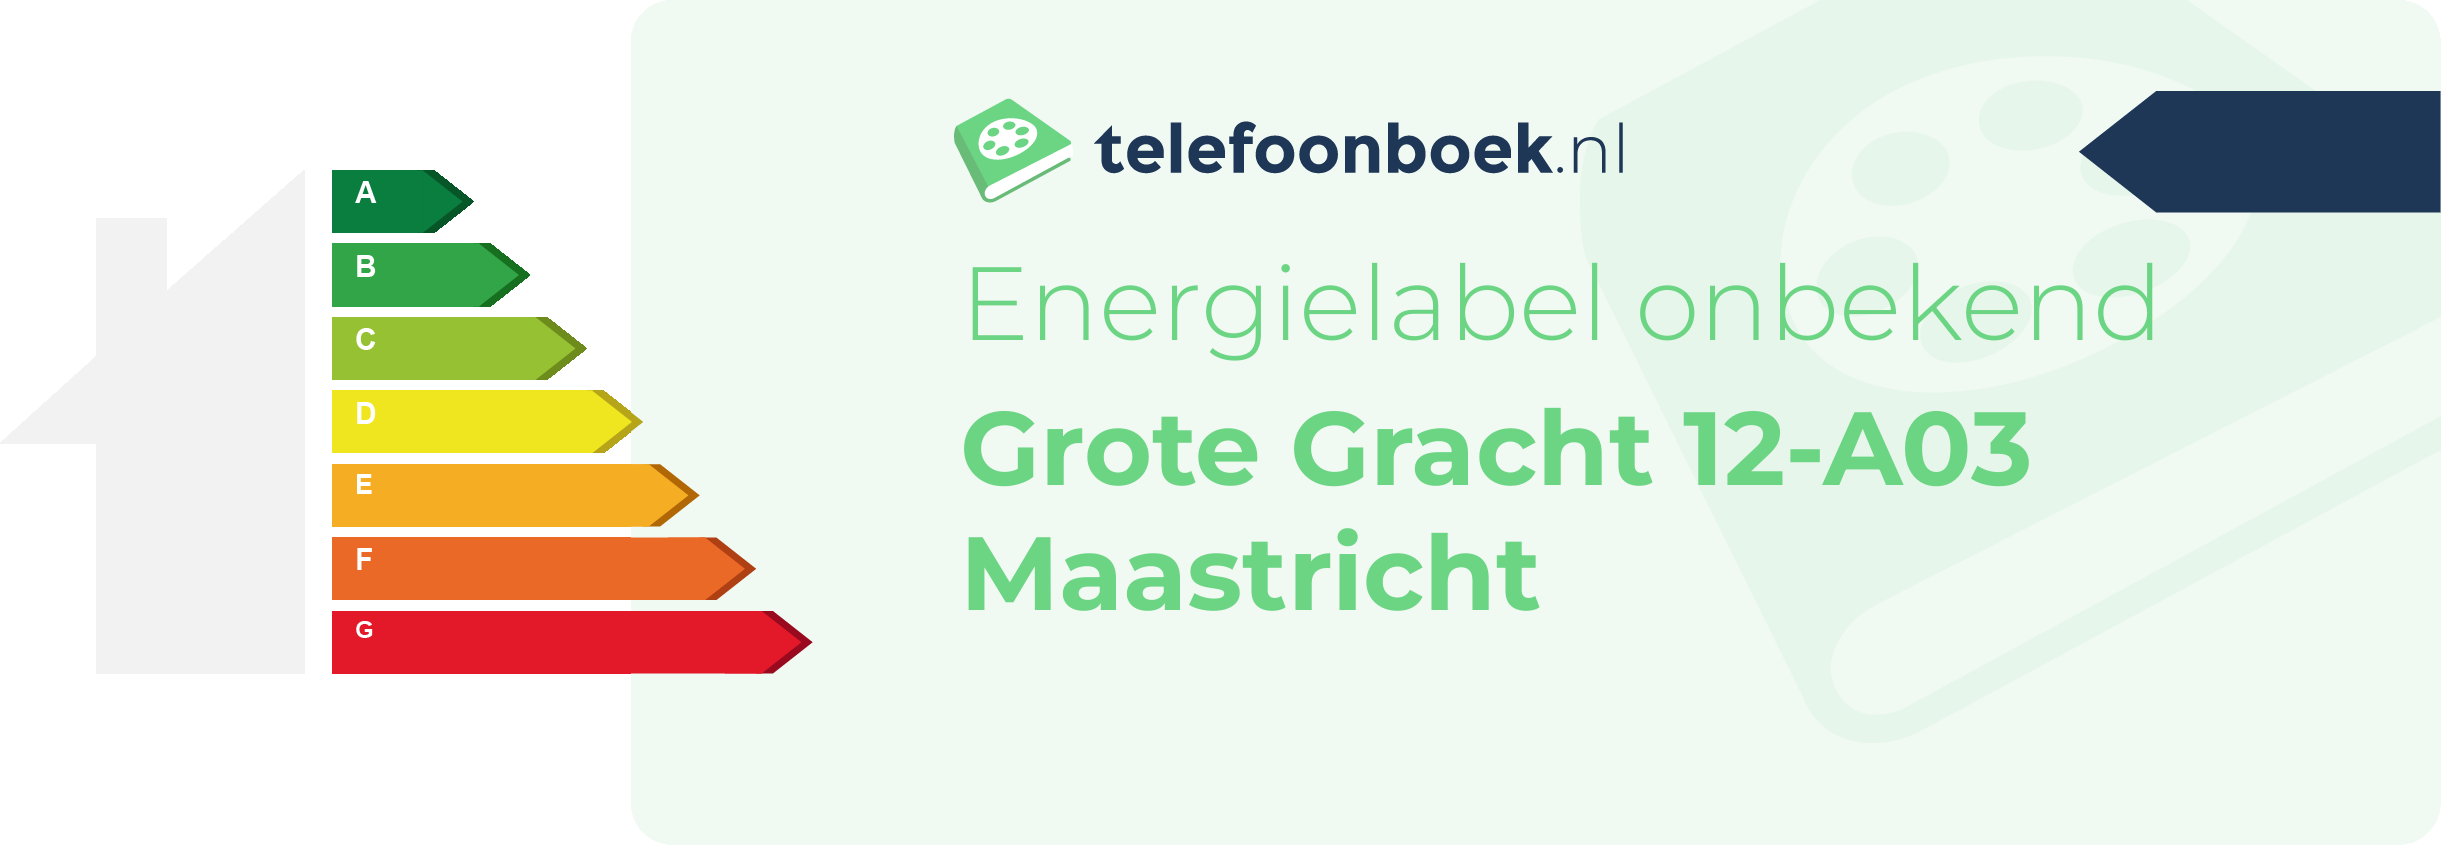 Energielabel Grote Gracht 12-A03 Maastricht